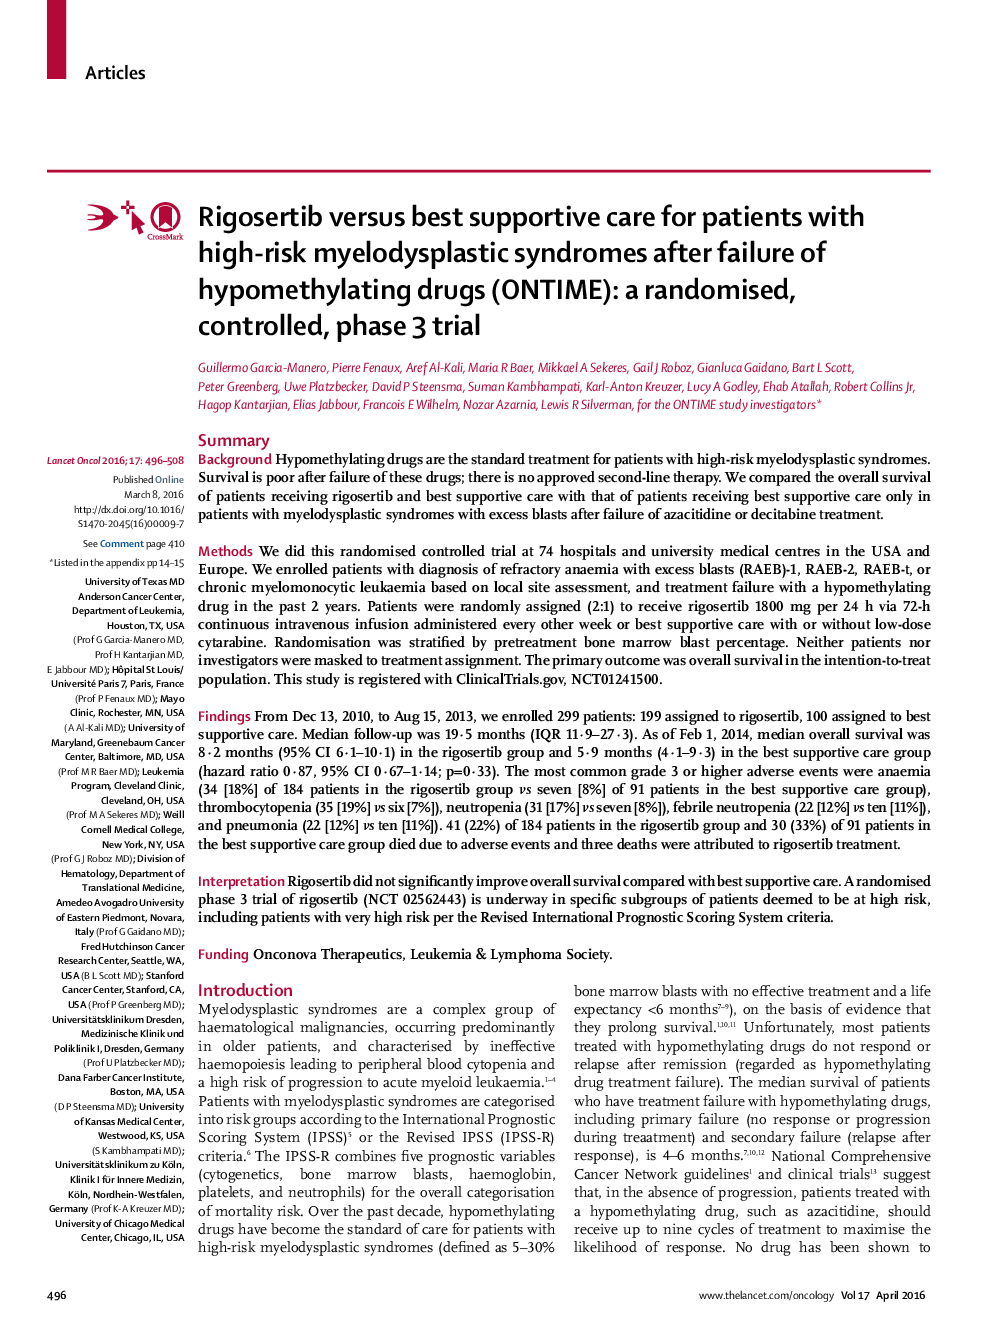 Rigosertib versus best supportive care for patients with high-risk myelodysplastic syndromes after failure of hypomethylating drugs (ONTIME): a randomised, controlled, phase 3 trial